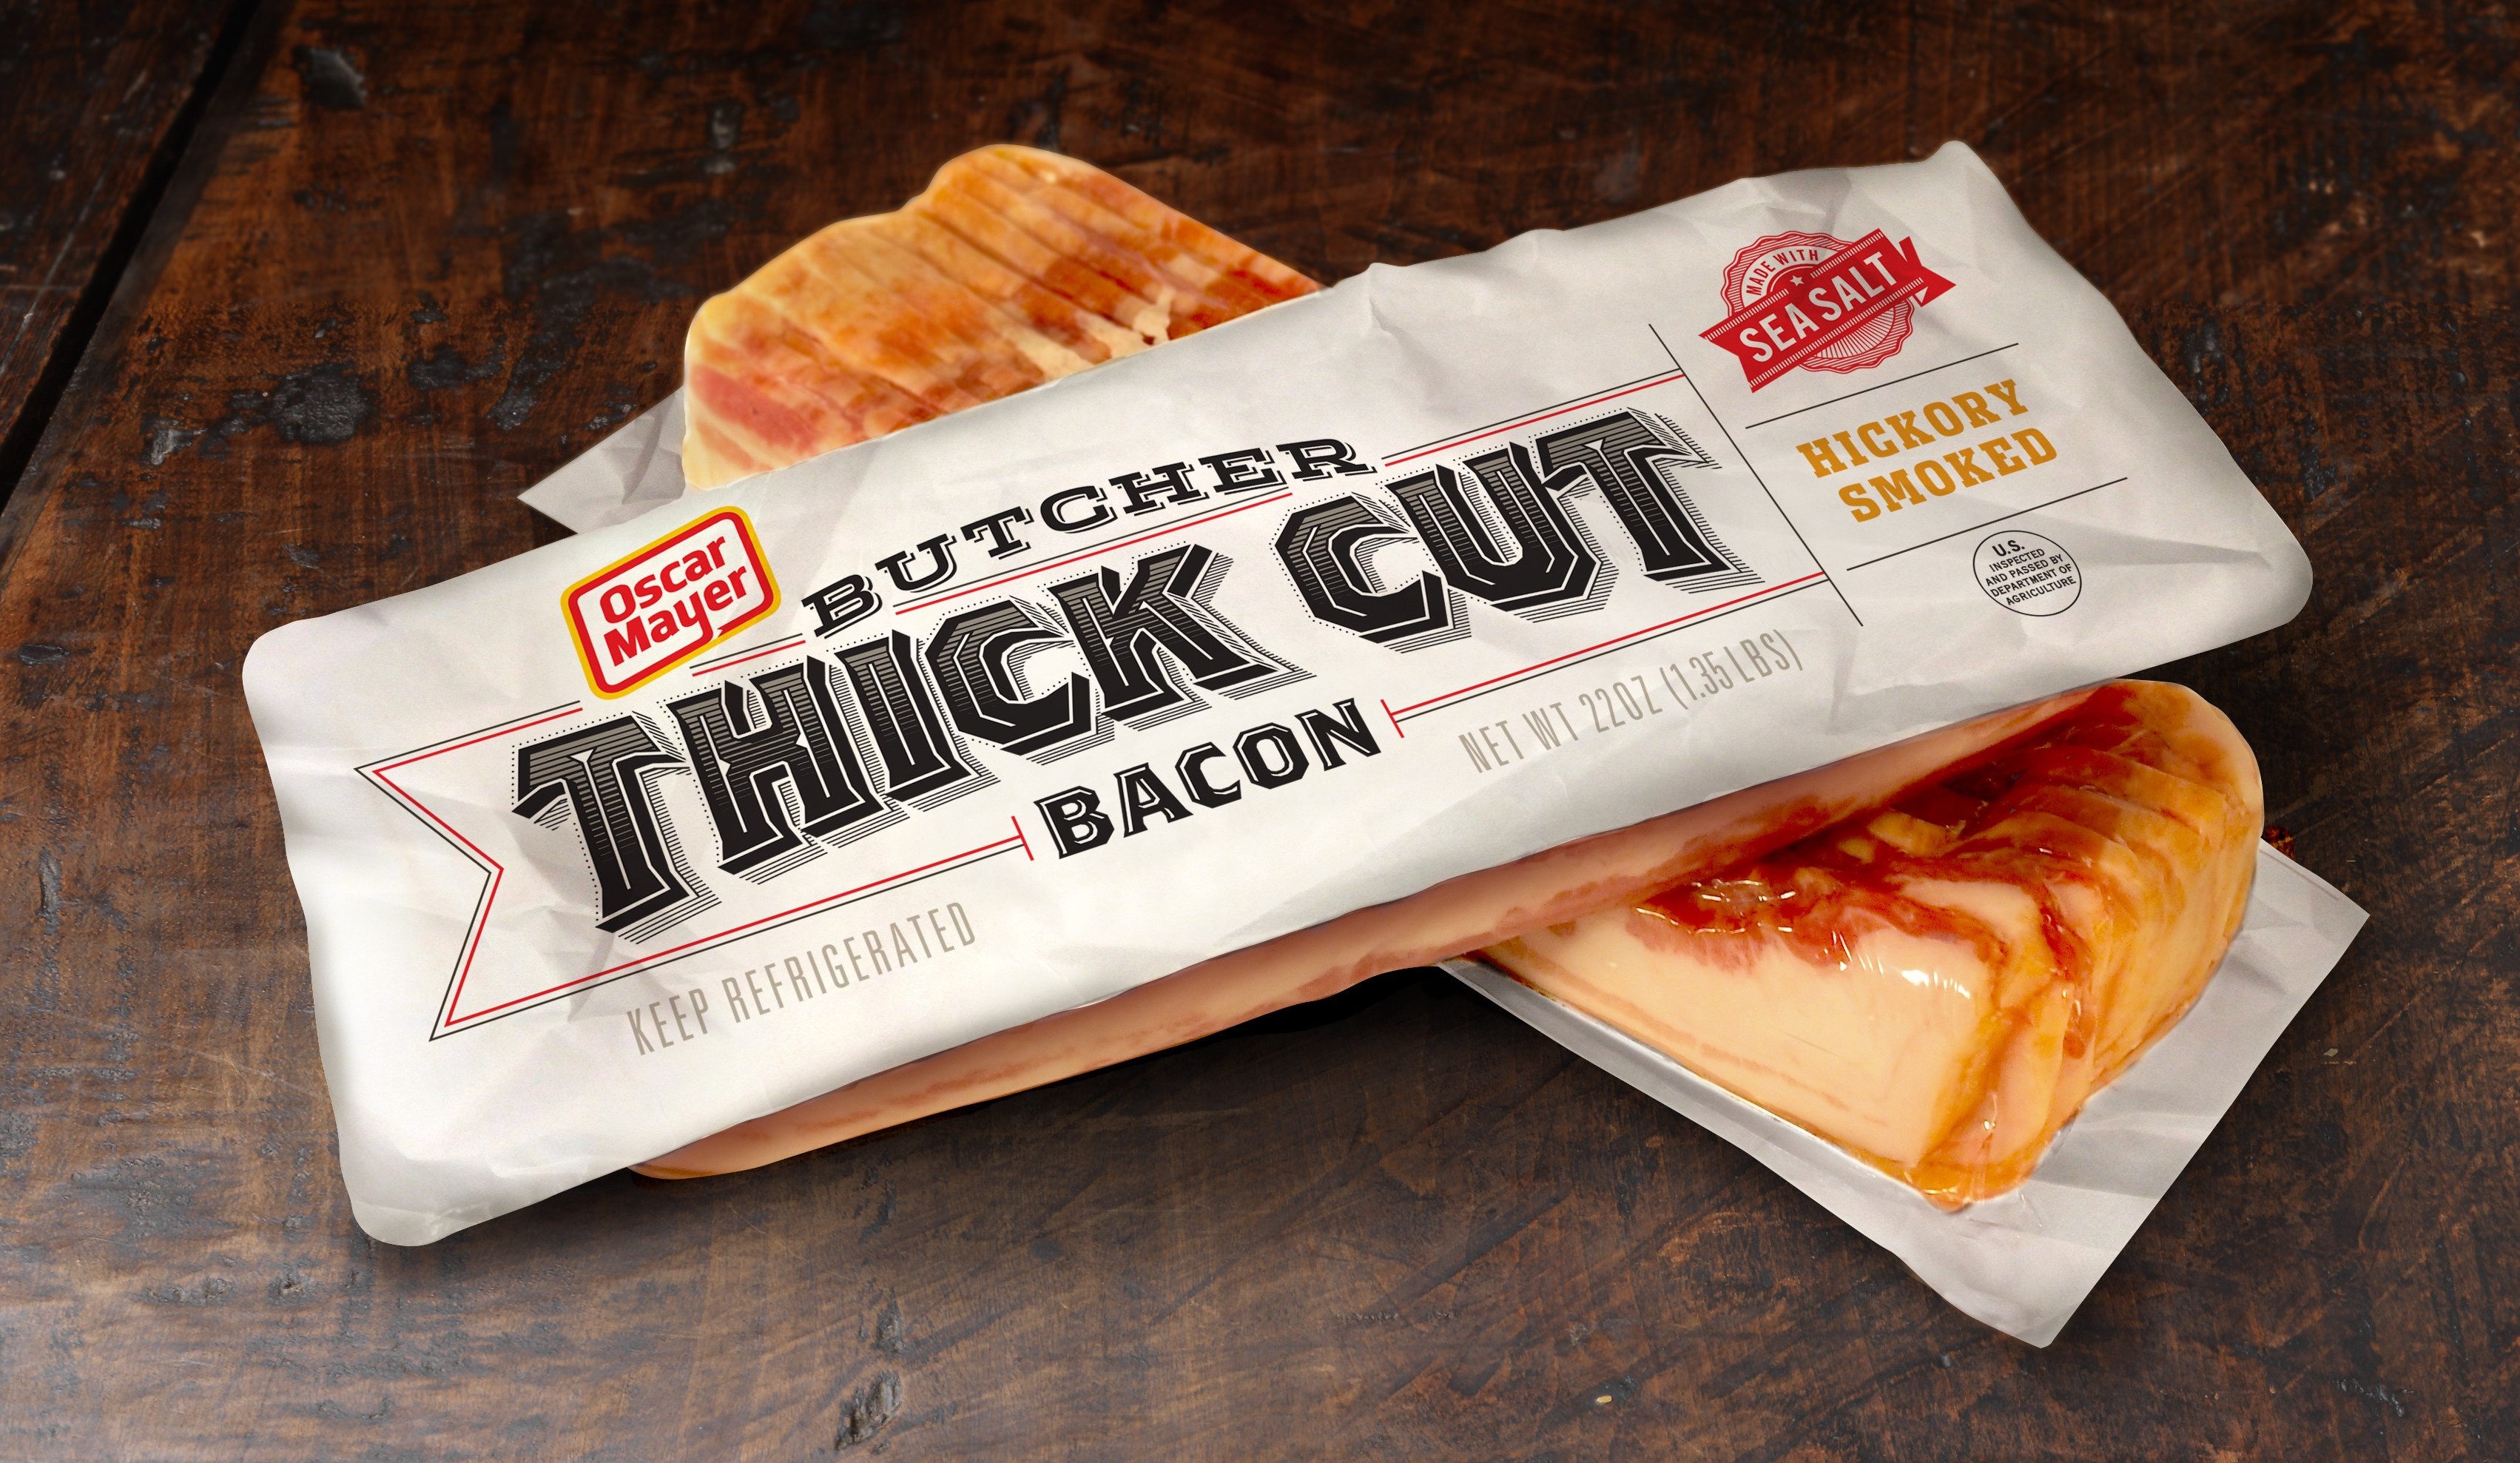 Butcher Thick Cut Bacon is Oscar Mayer’s most premium product, but consumers weren’t buying it. Landor broke category conventions by using the back panel of packaging as the front—instantly differentiating Butcher Thick Cut from every other bacon on the market.